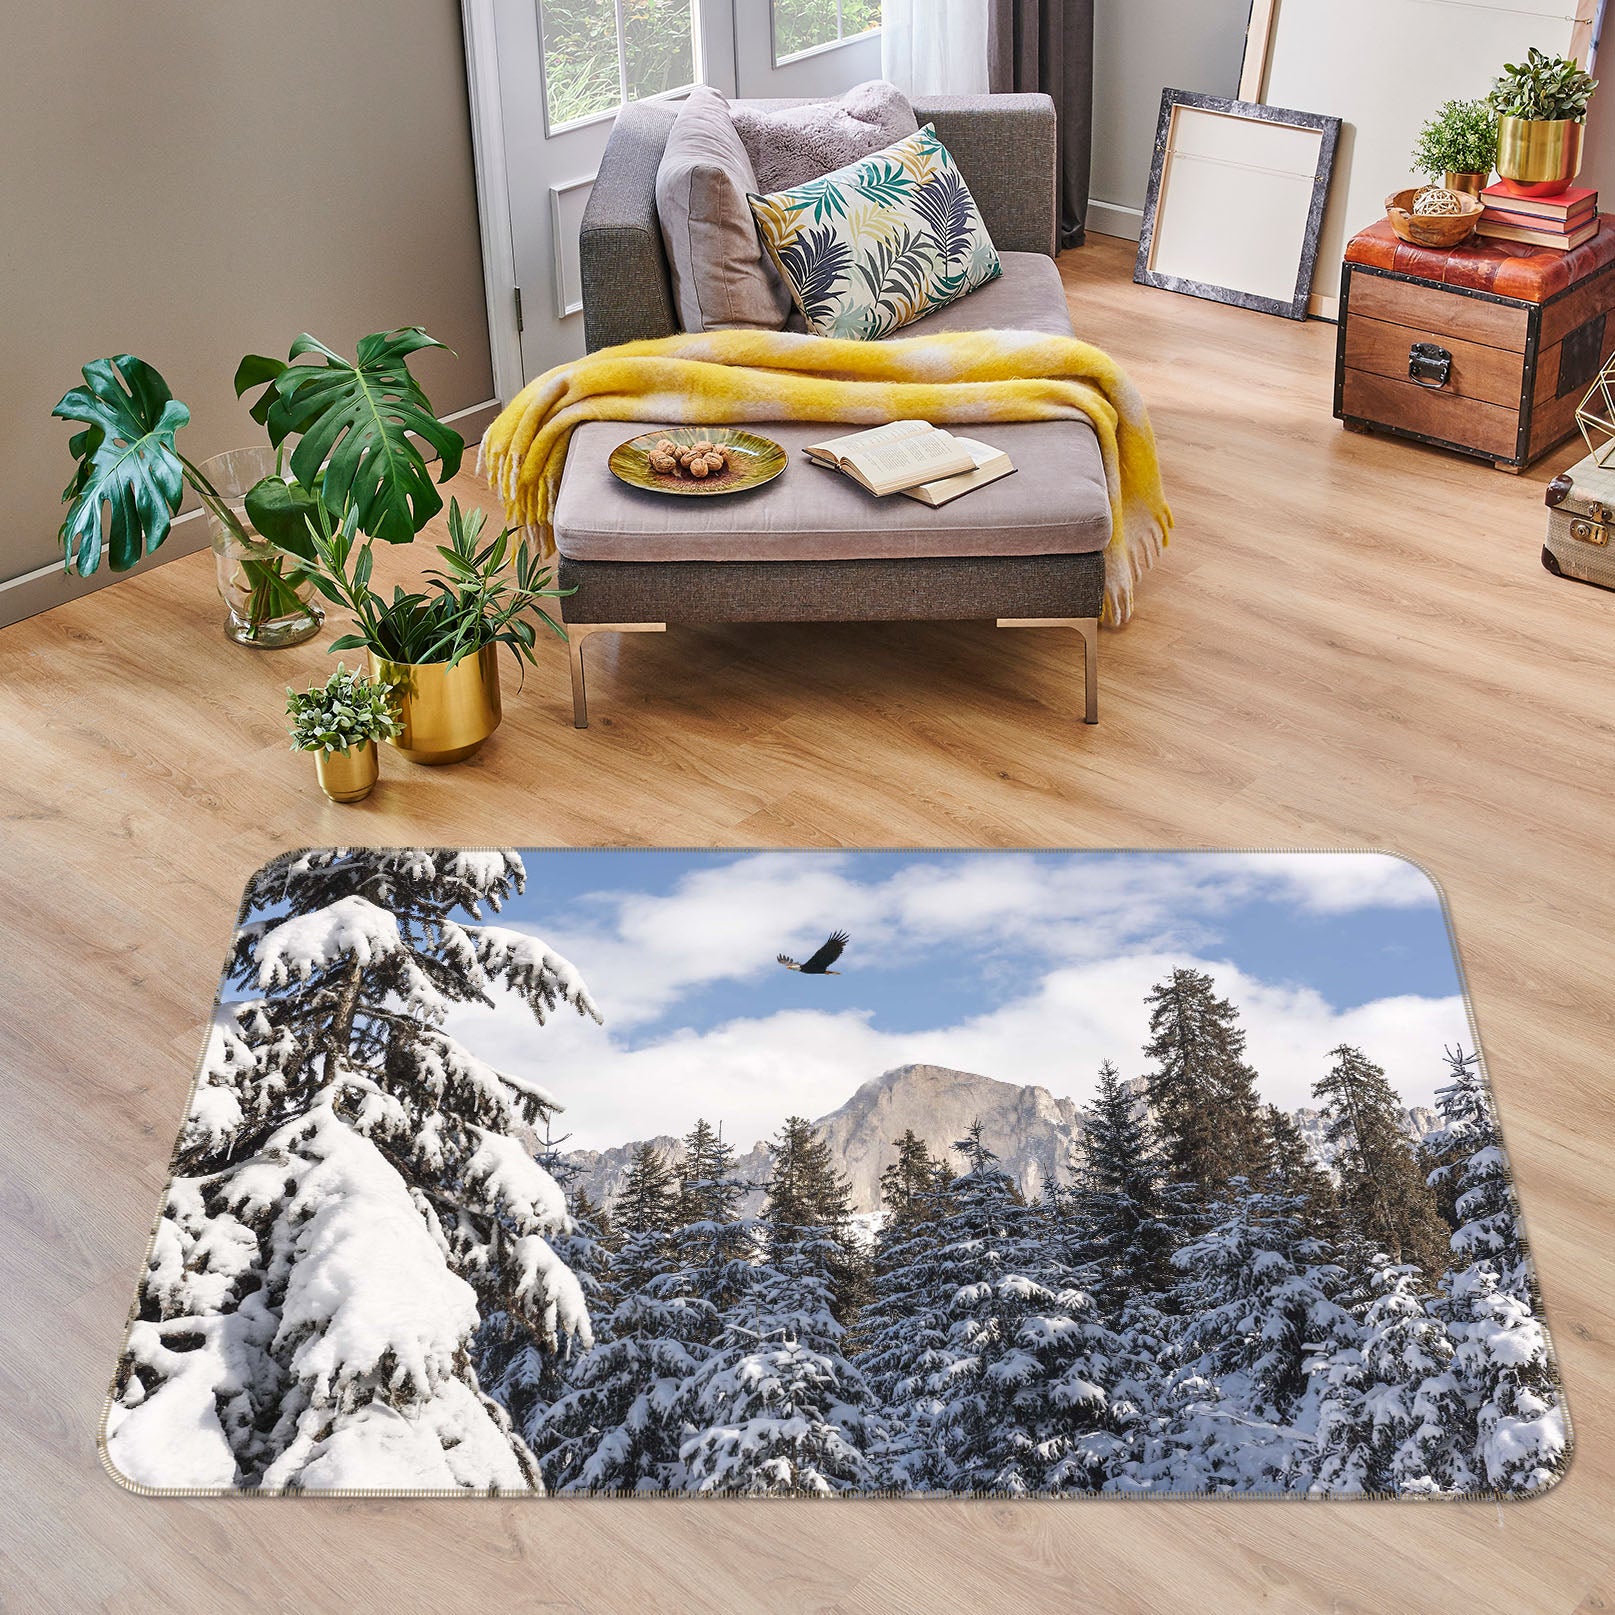 3D Heavy Snow Forest 1155 Marco Carmassi Rug Non Slip Rug Mat